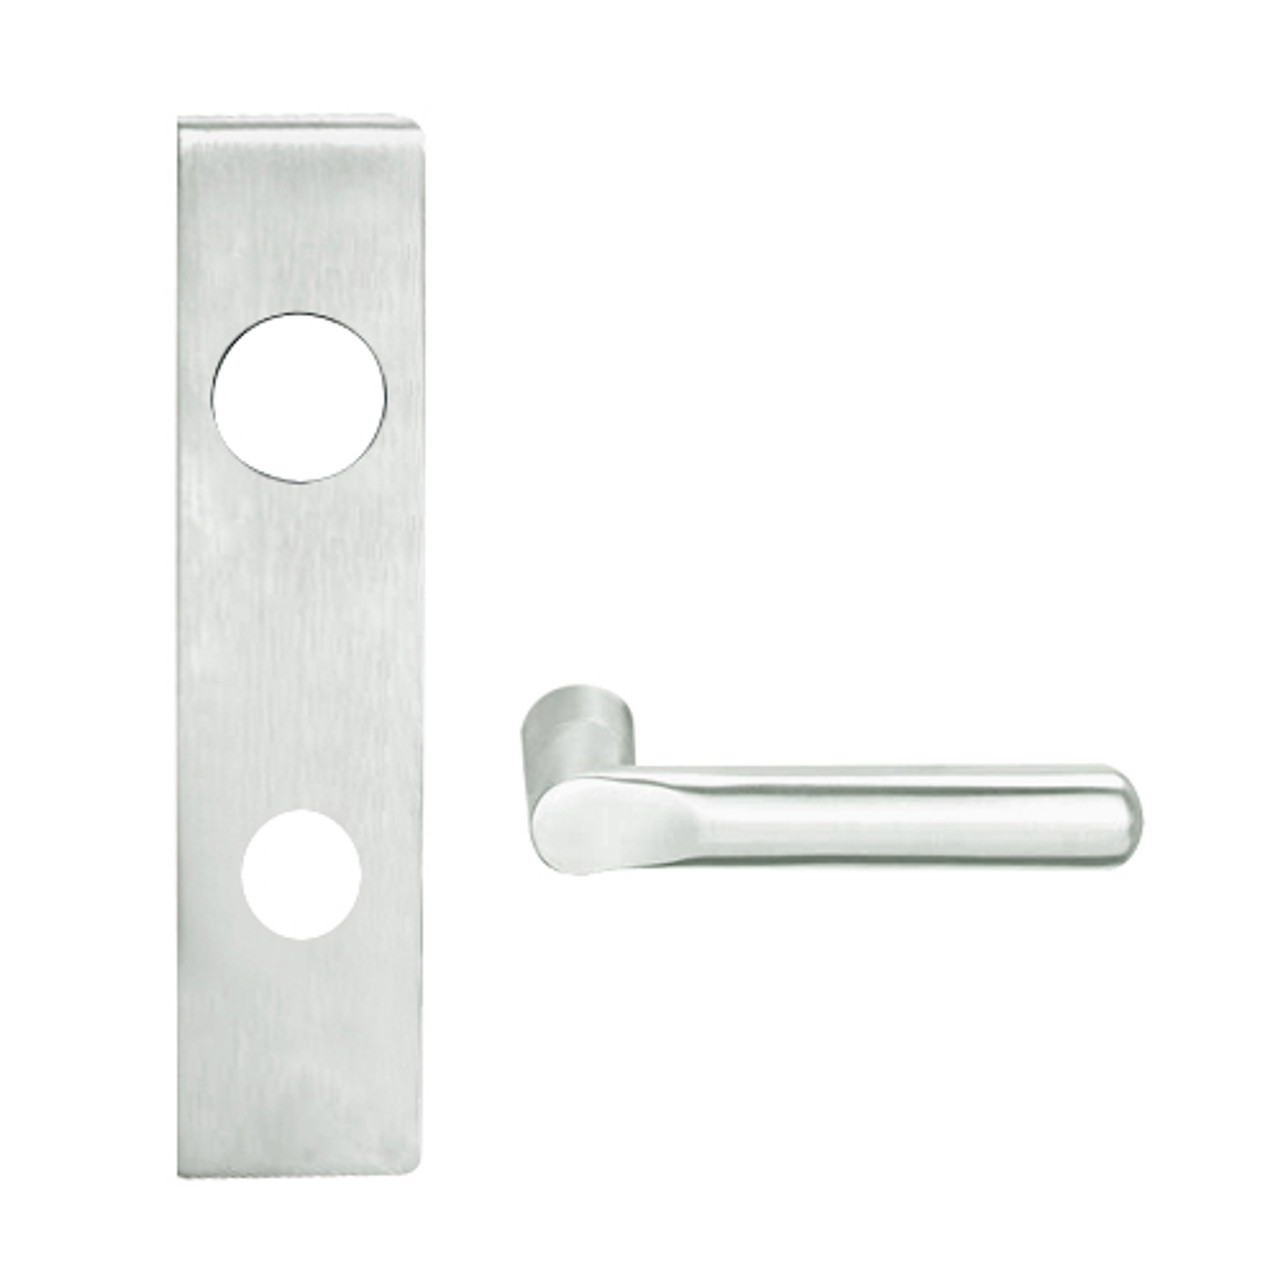 L9026R-18L-619 Schlage L Series Exit Lock with Cylinder Commercial Mortise Lock with 18 Cast Lever Design and Full Size Core in Satin Nickel